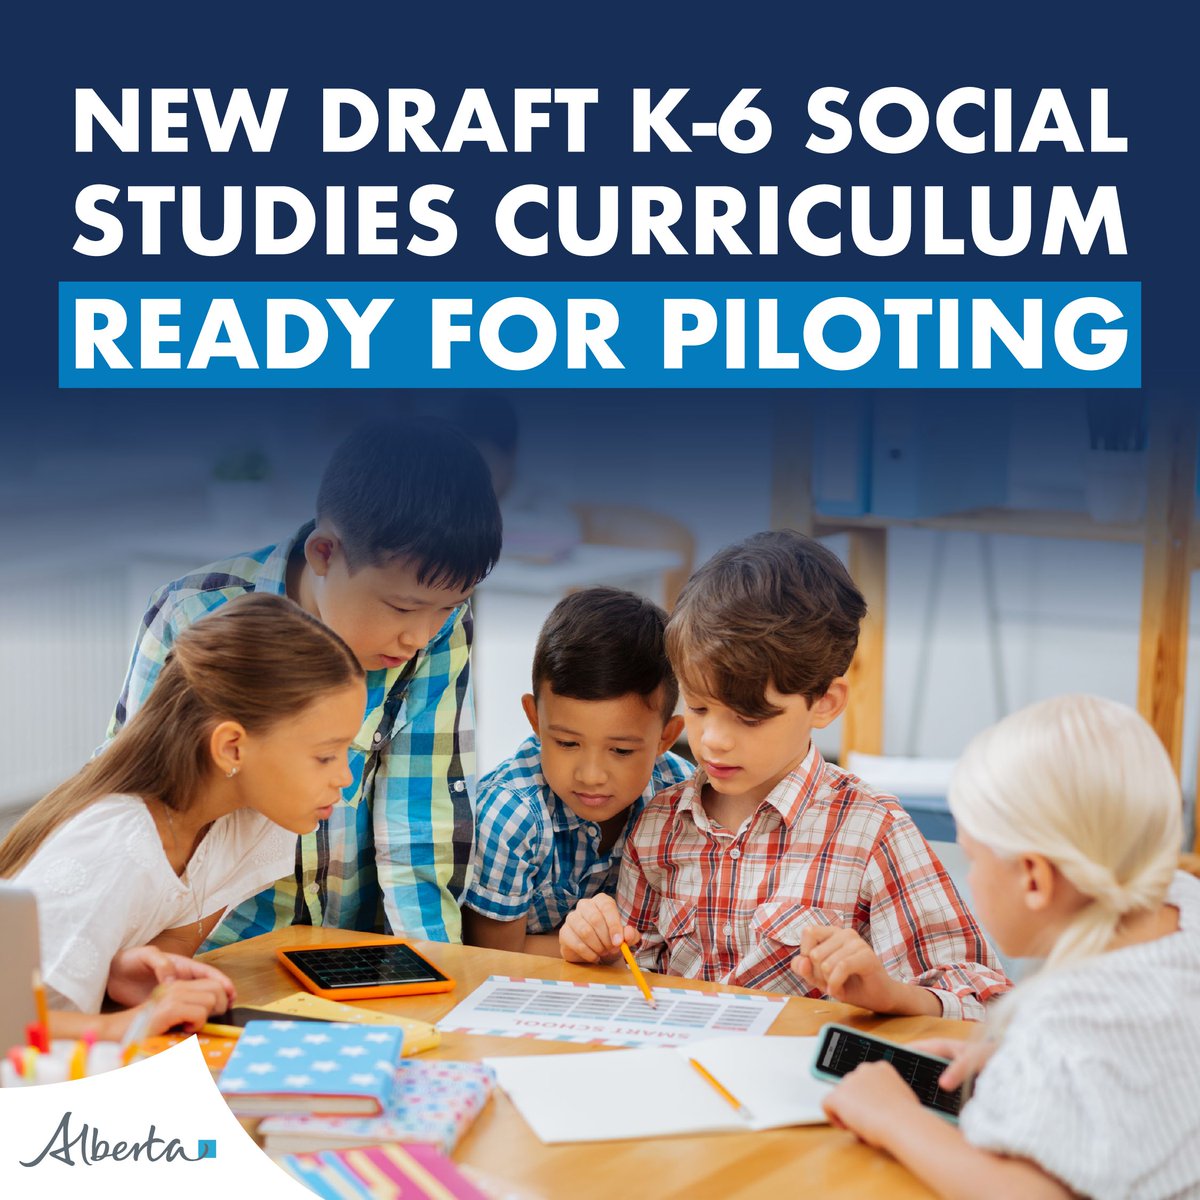 Alberta’s draft K-6 social studies curriculum is now ready for piloting. We have listened carefully to those who gave us feedback and have made changes to improve this latest version. Thank you to the thousands of Albertans who have been involved so far. #ableg #abed